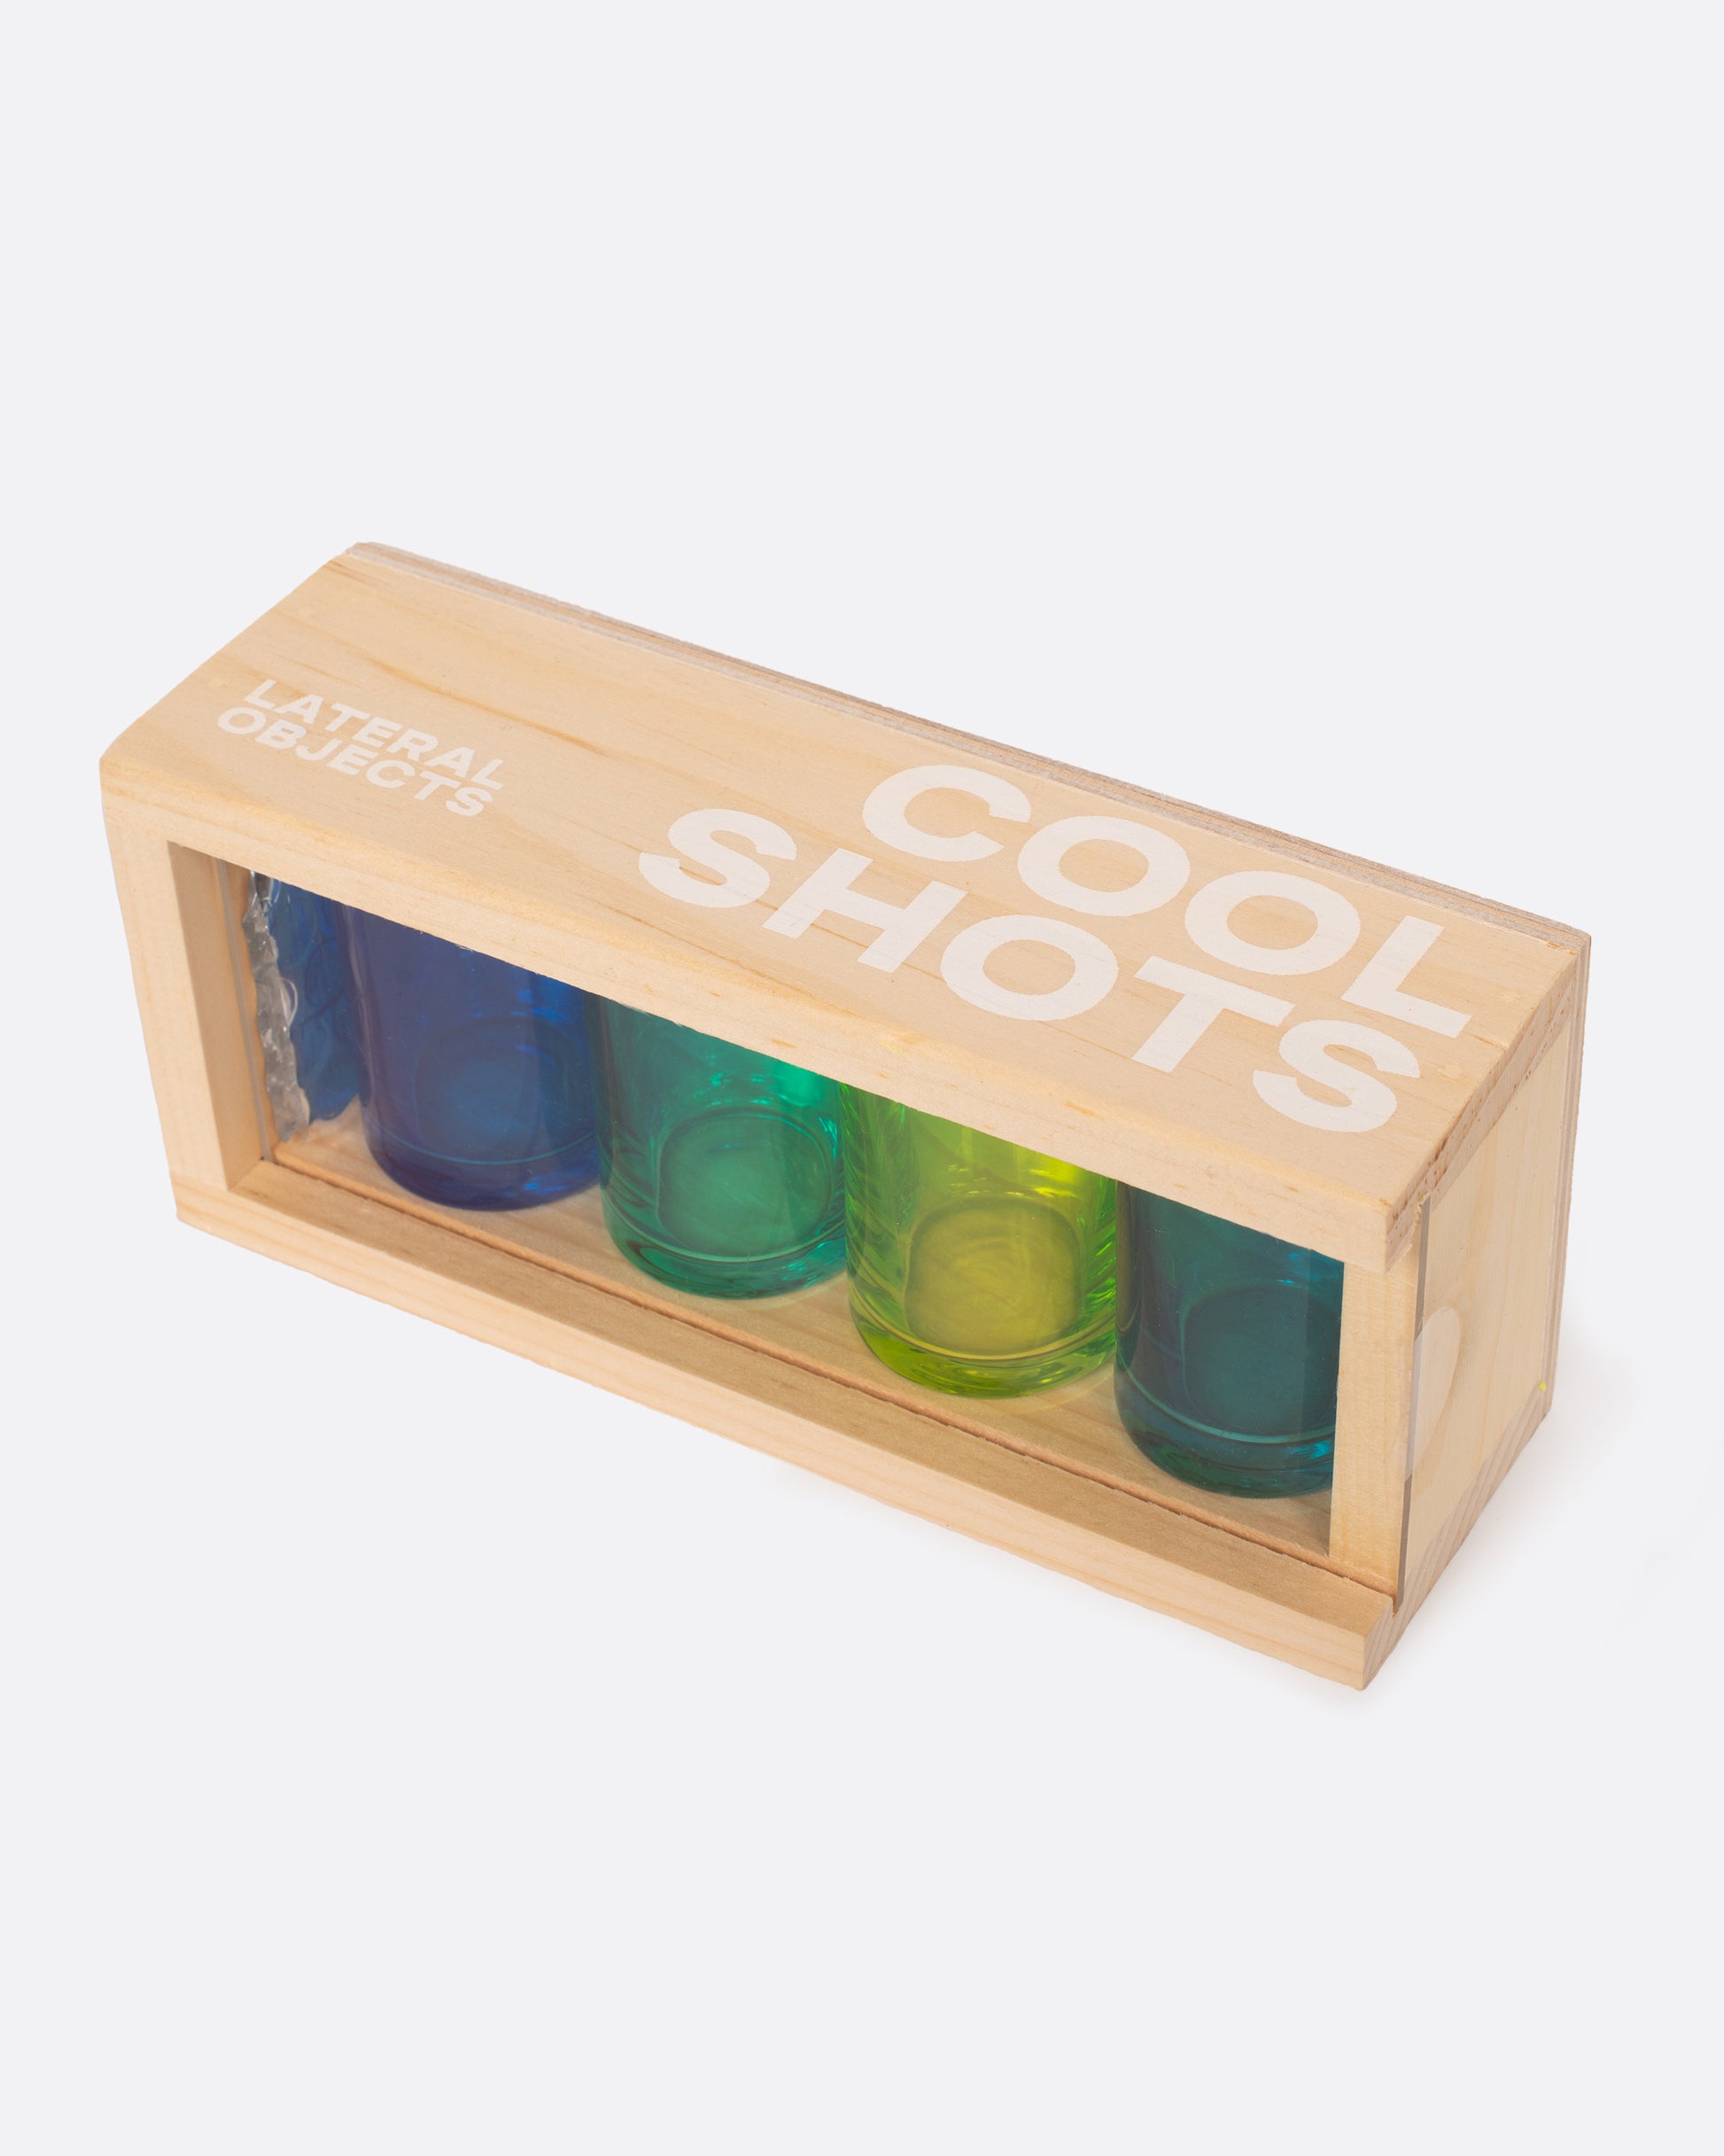 Four glass shot glasses in shades of green and blue, shown in their wood carrying case.